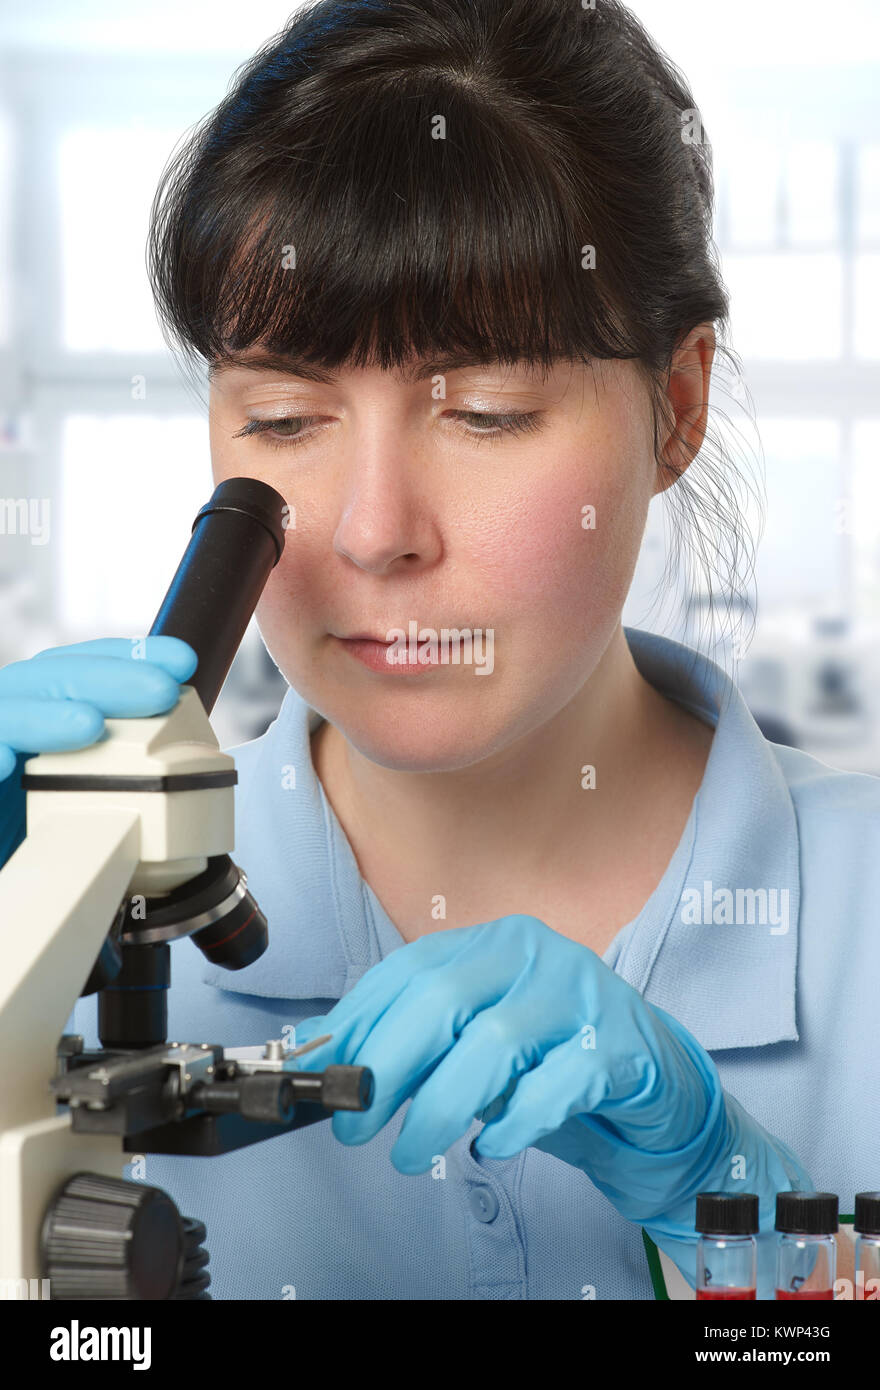 Portrait of a young female scientist analyzing red liquid samples under the microscope Stock Photo